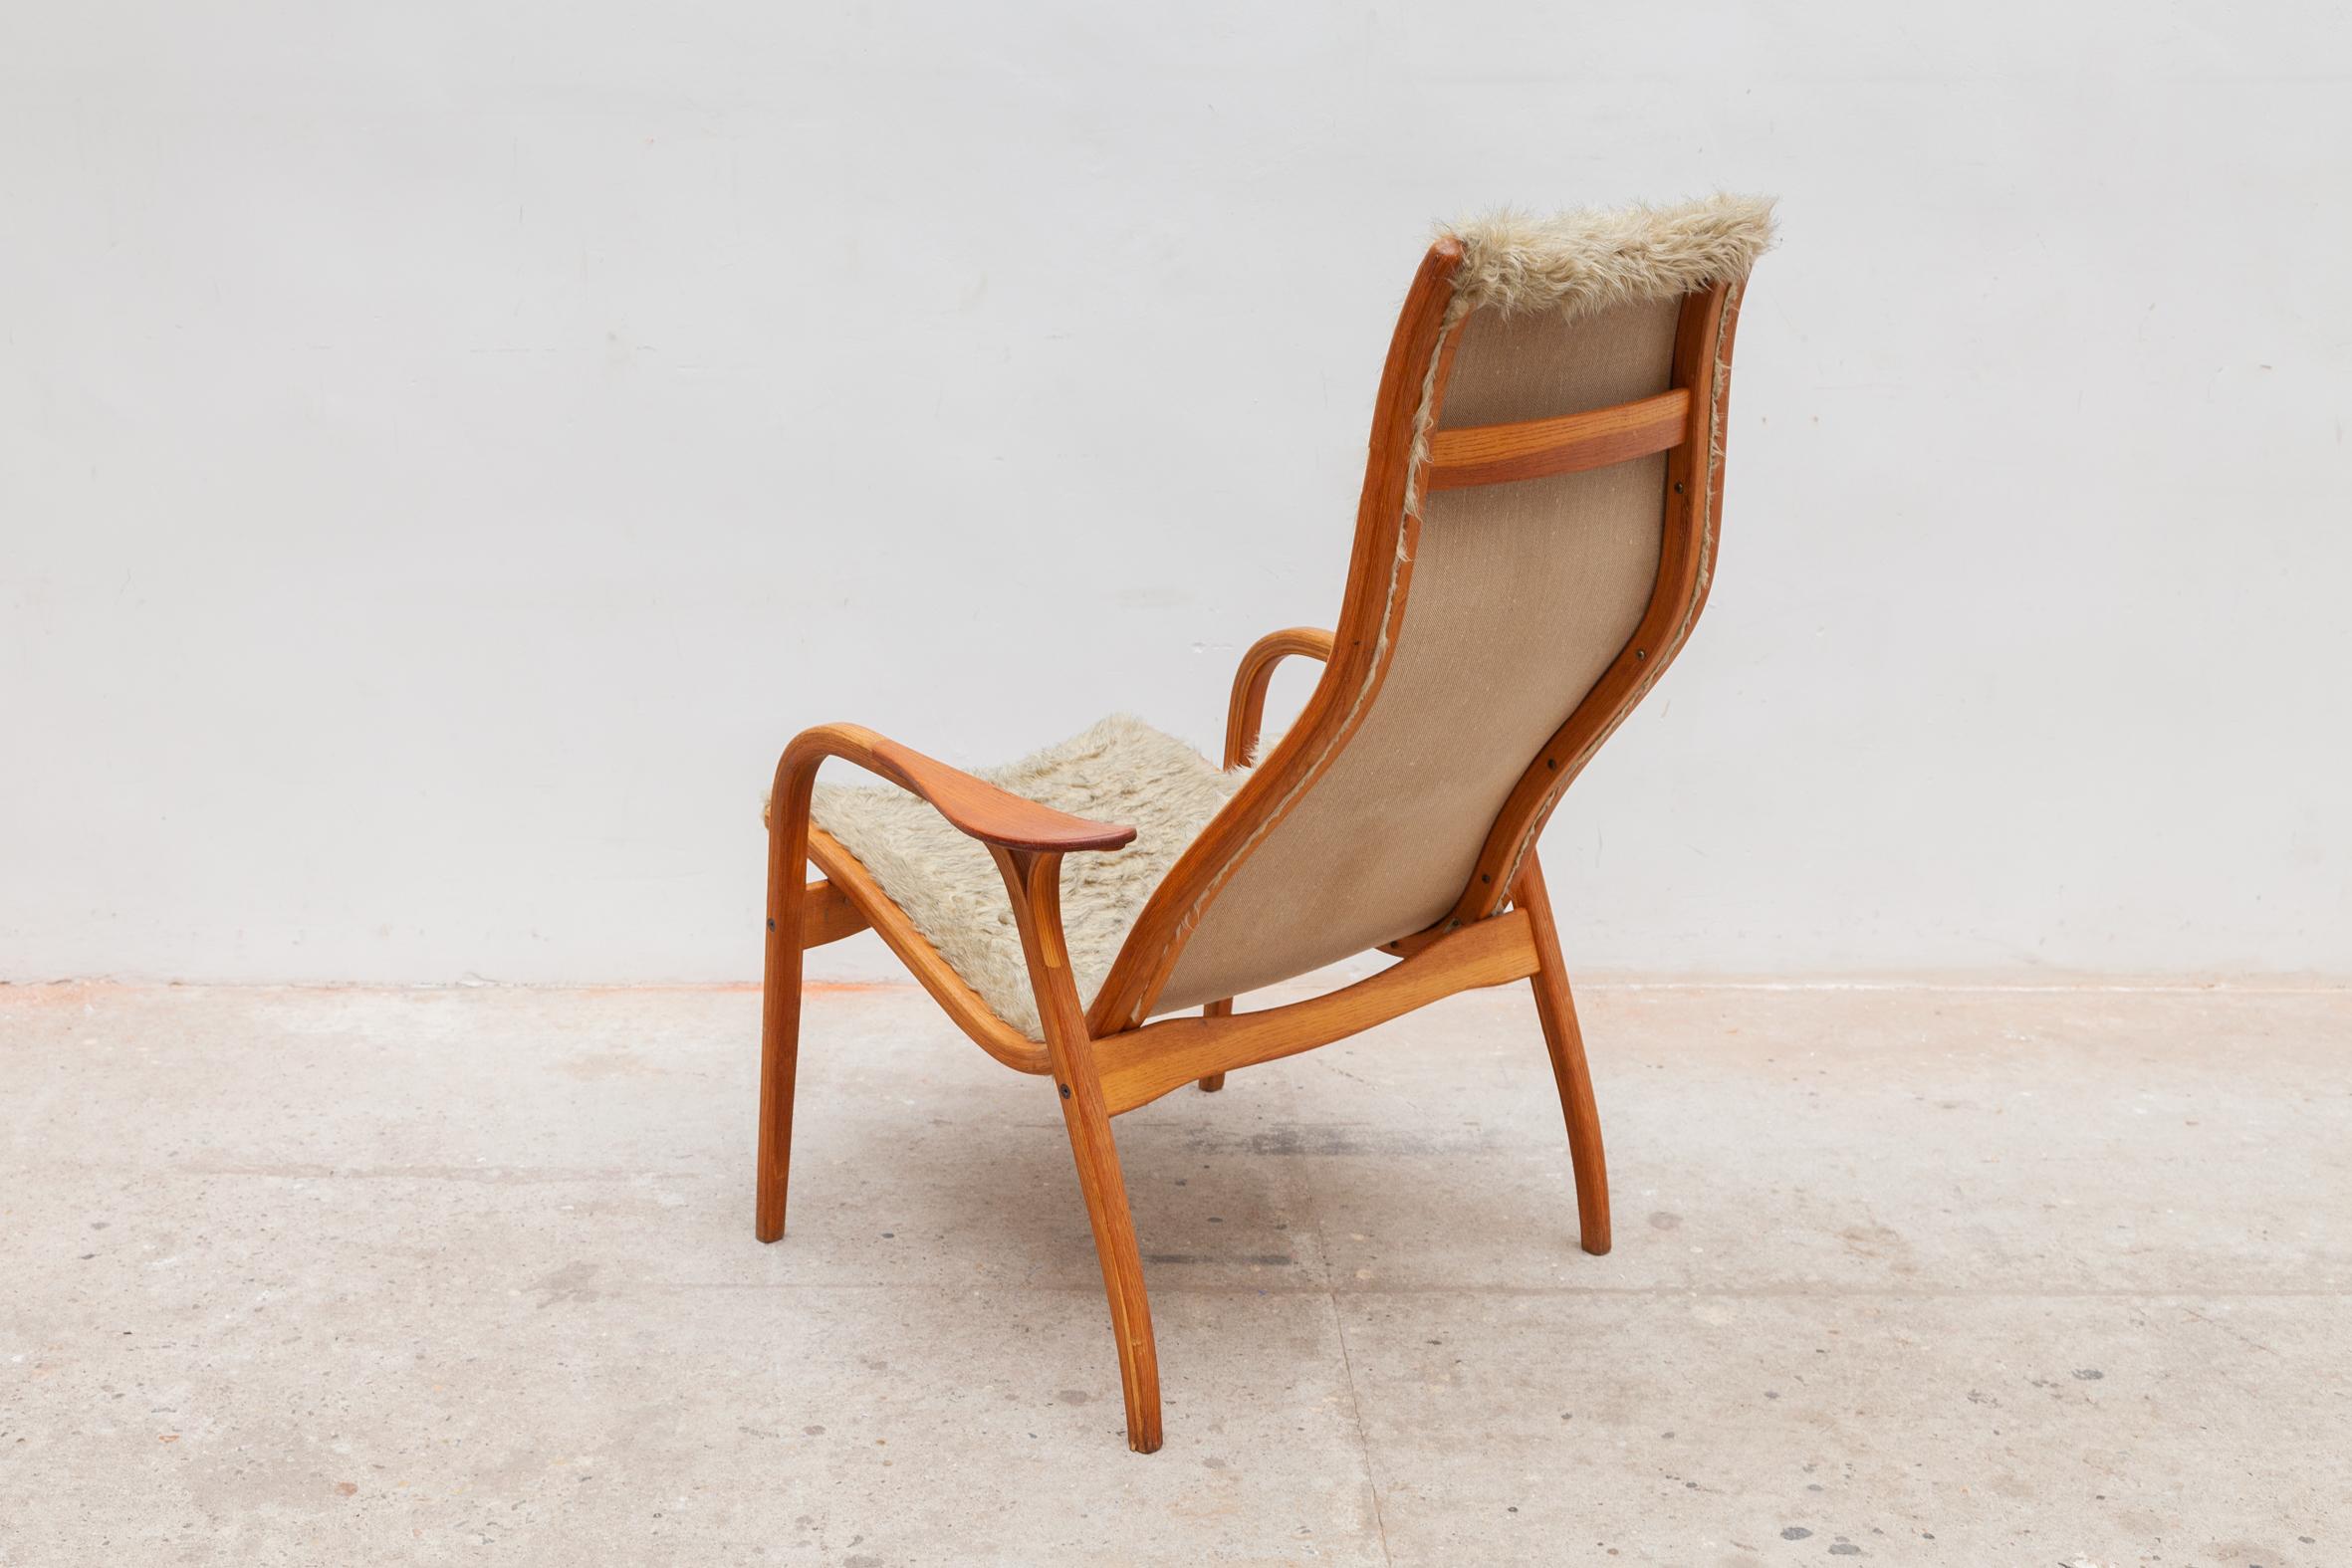 Hand-Crafted Lamino Easy Chair by Yngve Ekström, 1956 for Swedese